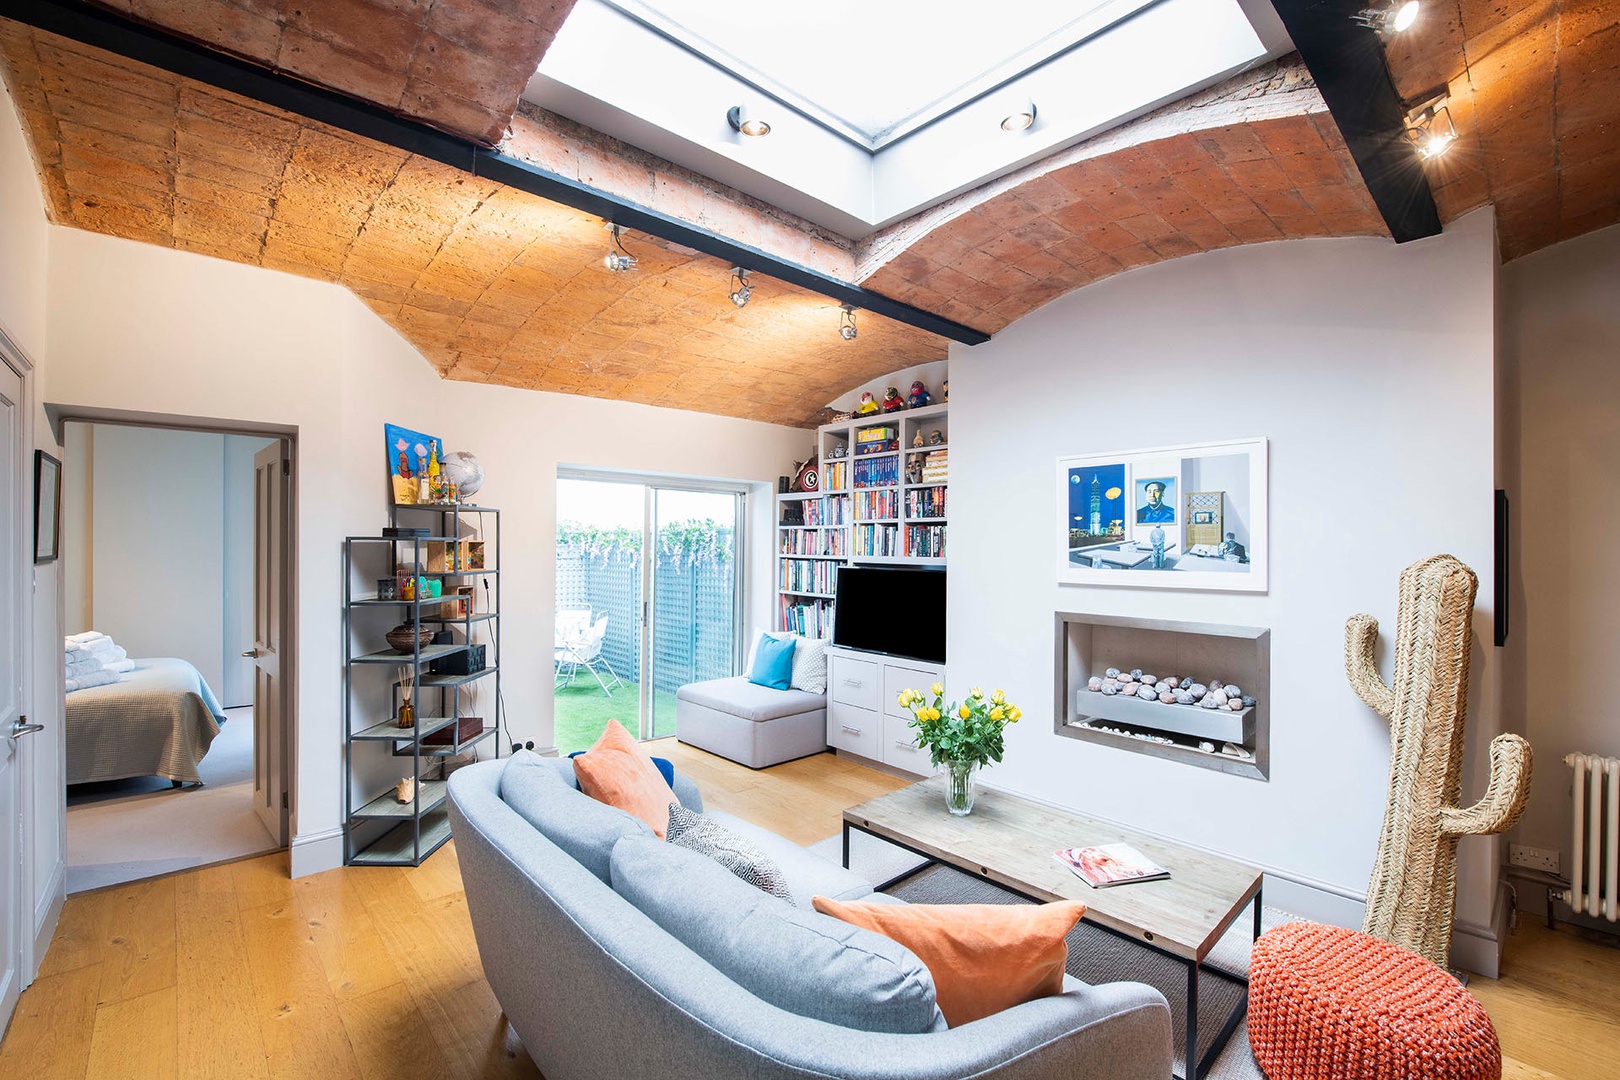 Light fills the living room from the large skylight.